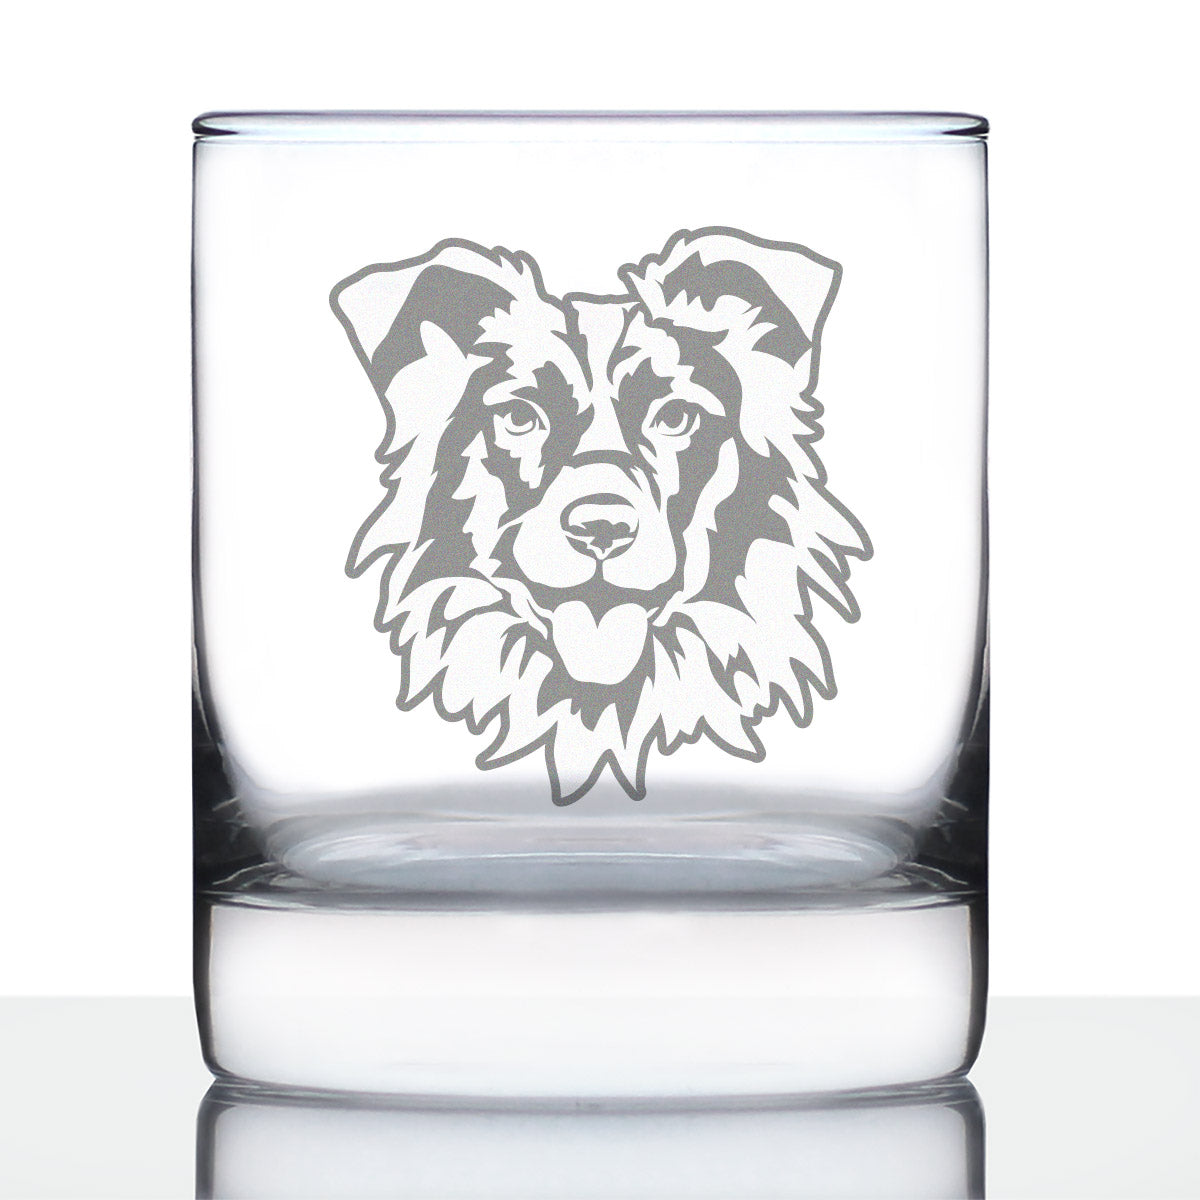 Border Collie Face Whiskey Rocks Glass - Unique Dog Themed Decor and Gifts for Moms &amp; Dads of Border Collies - 10.25 Oz